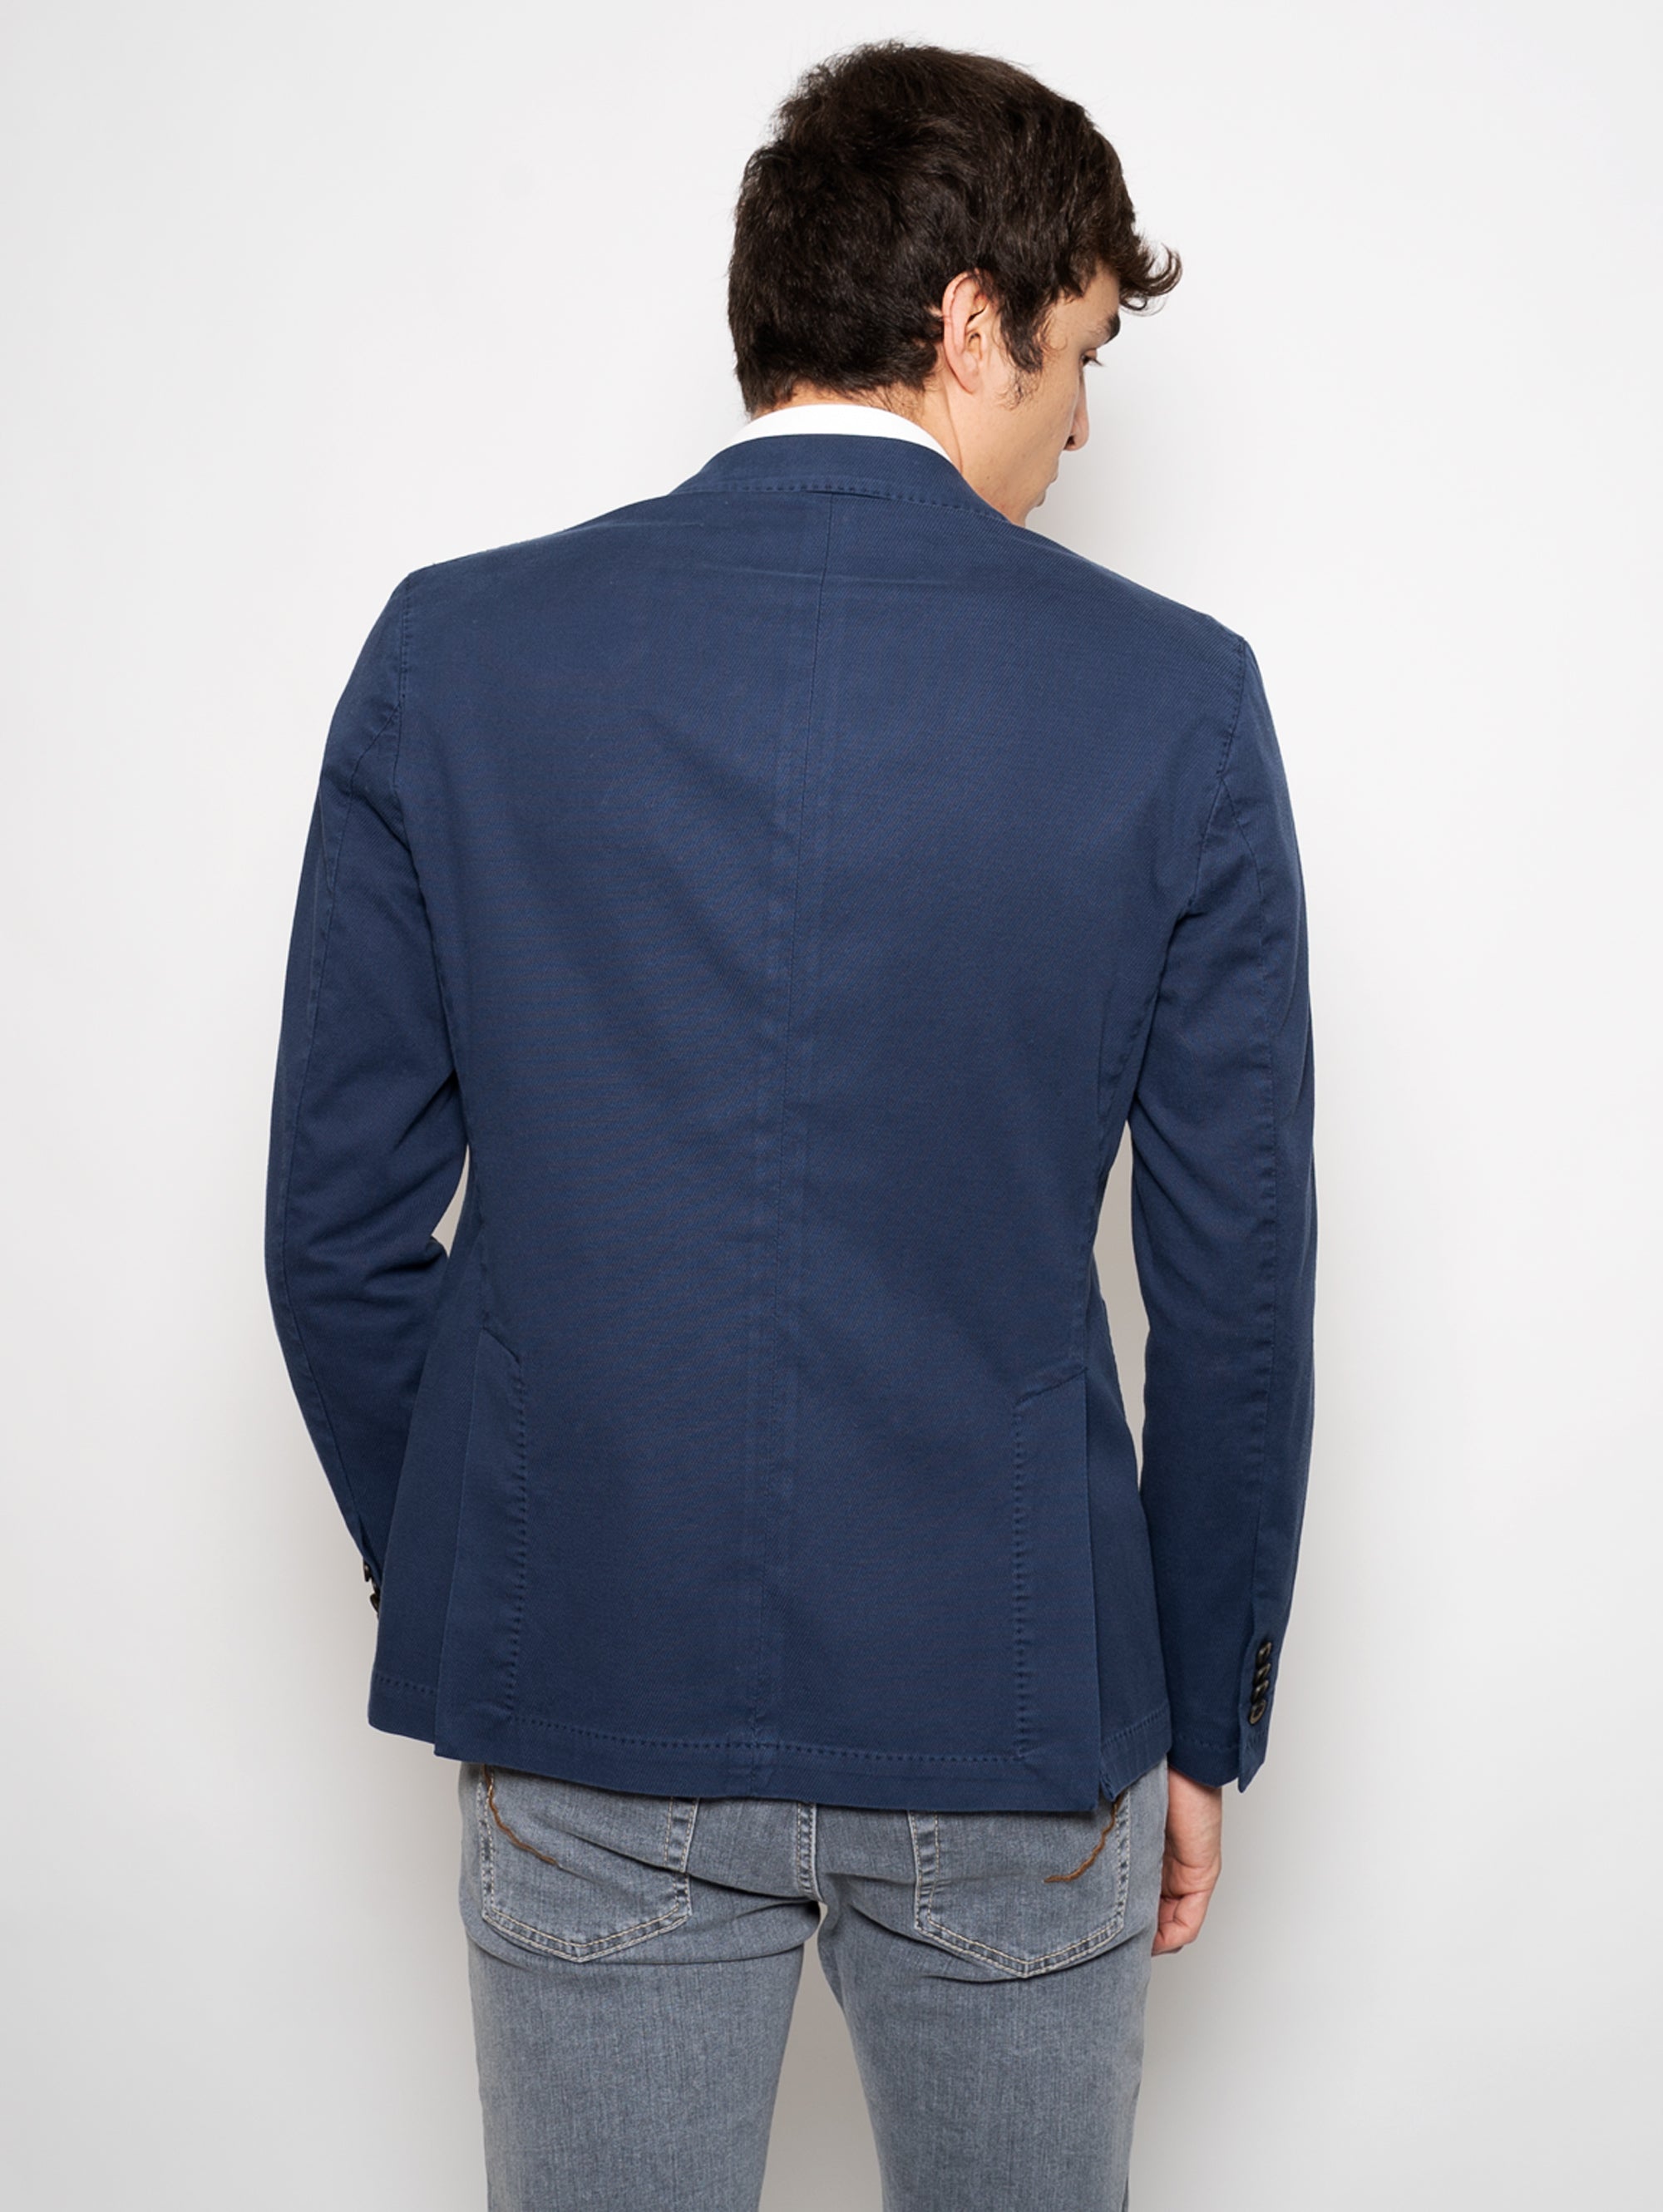 Double-Breasted Jacket in Blue Woven Cotton